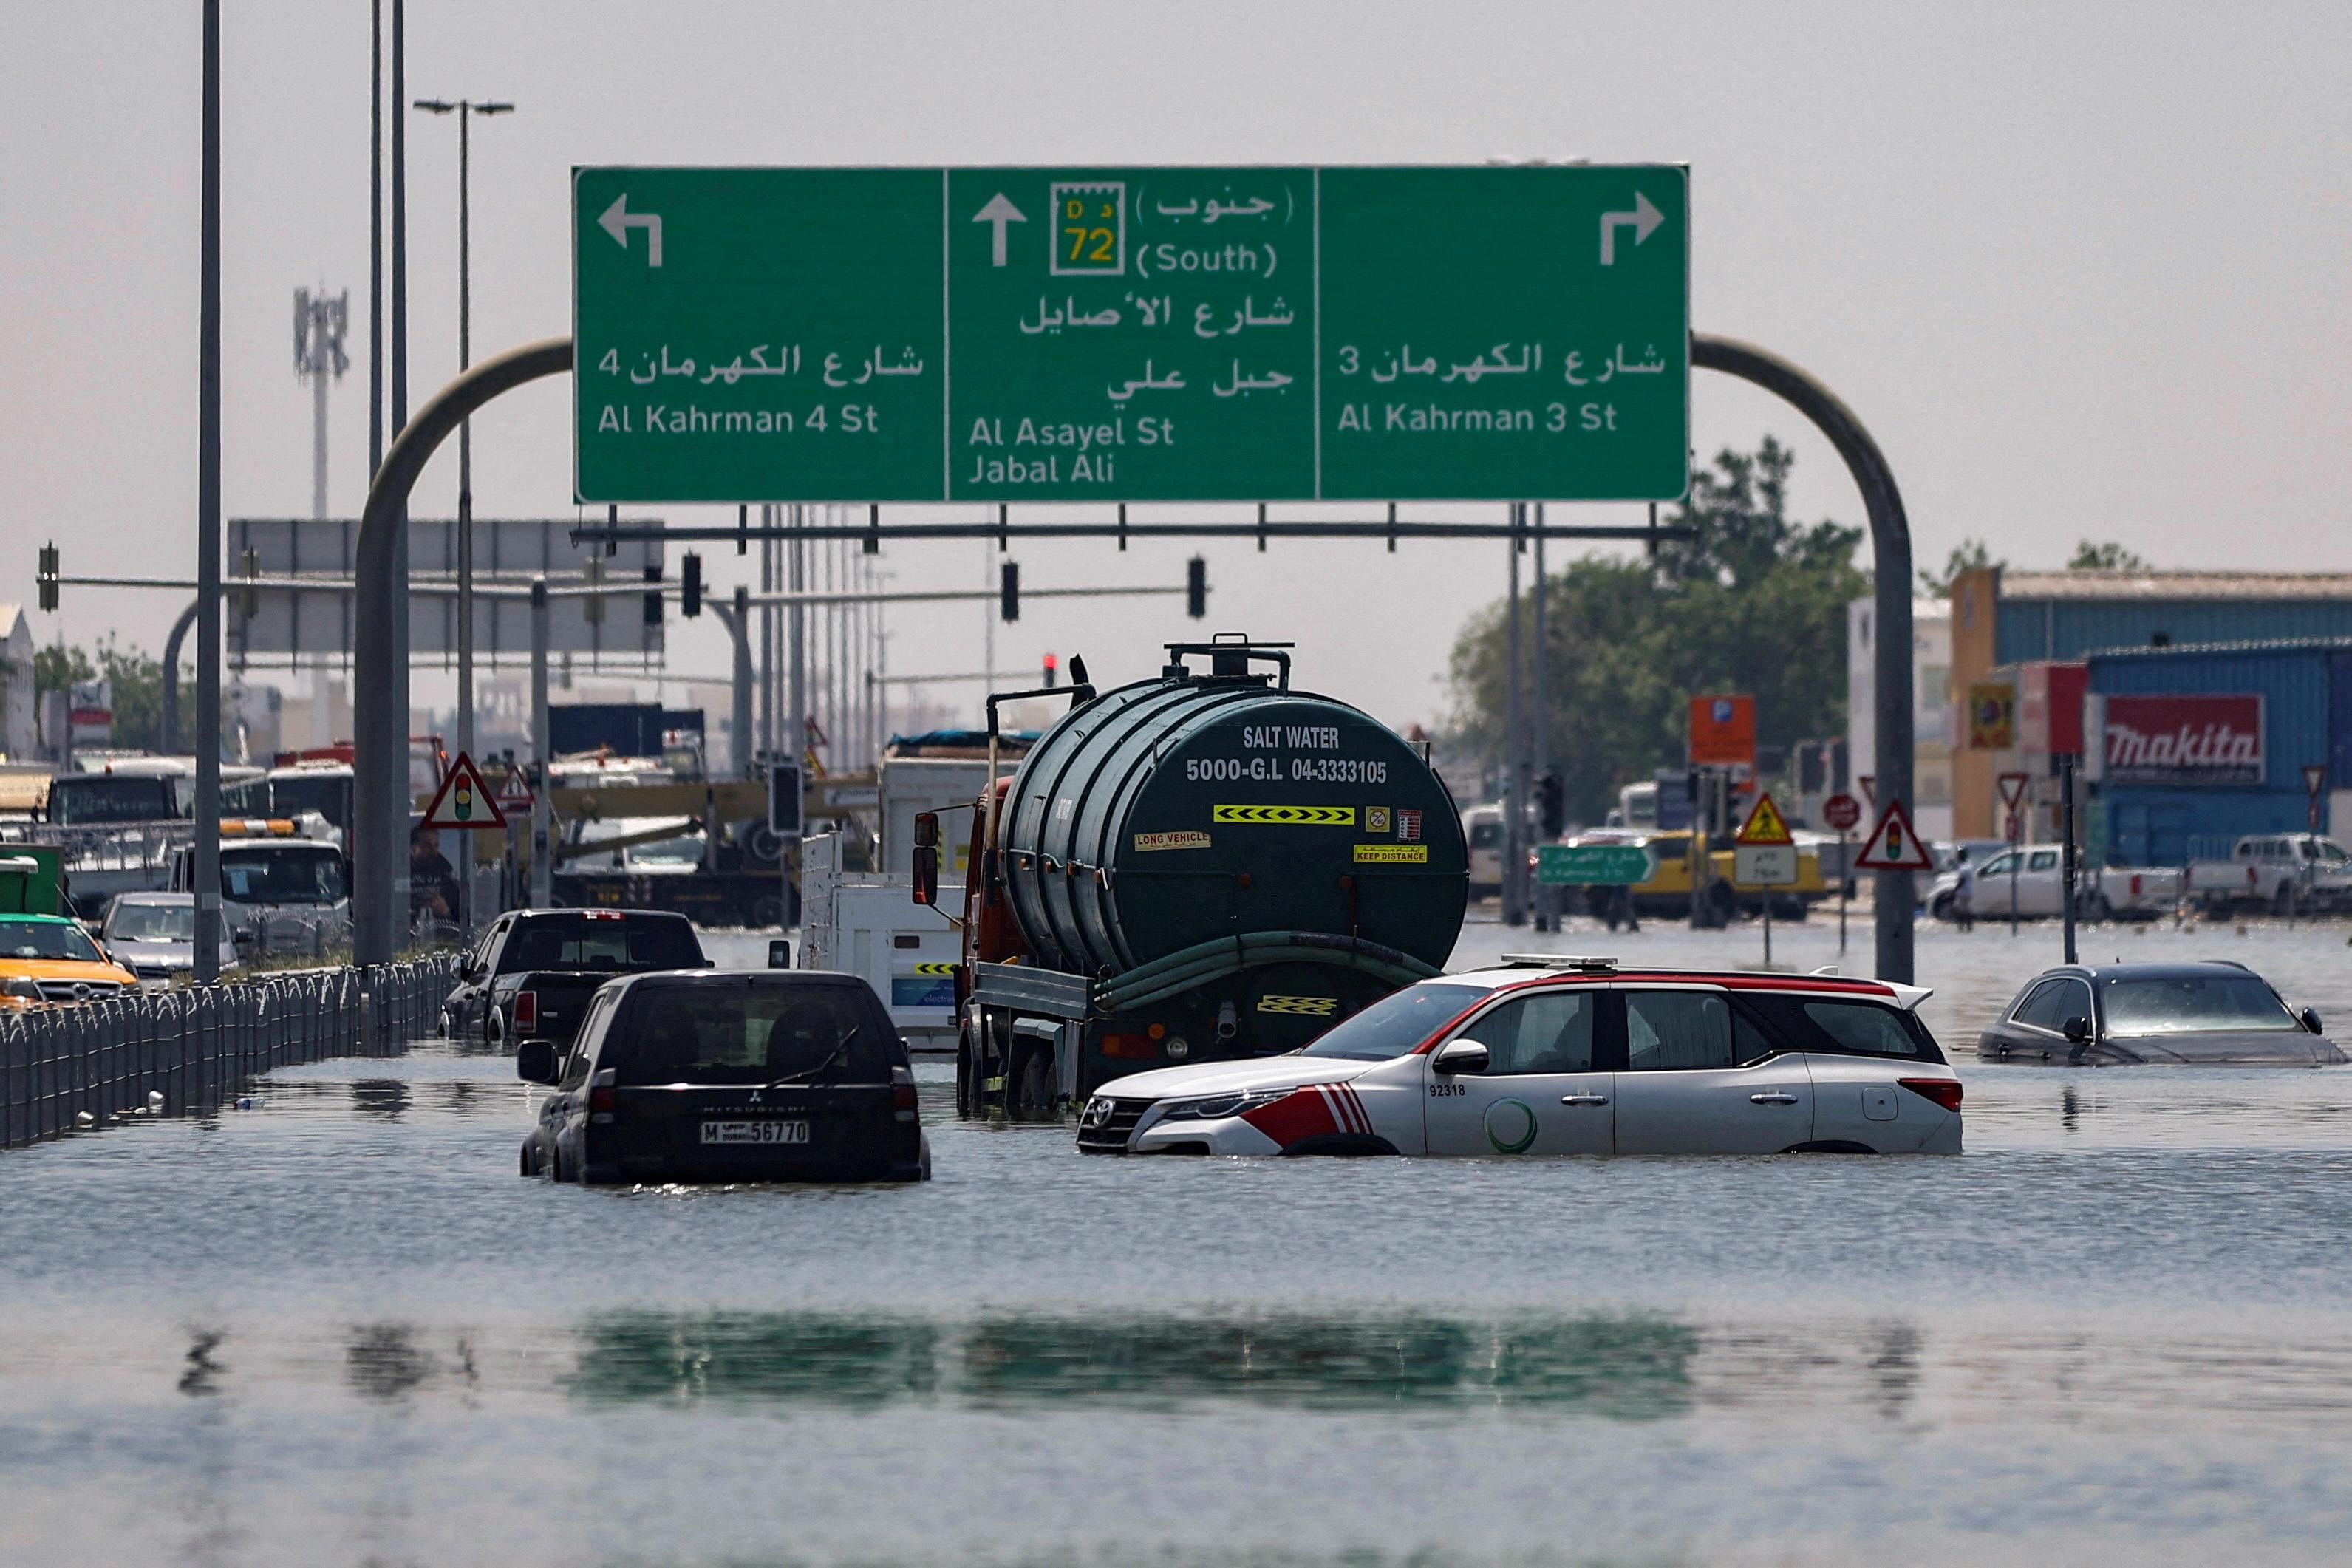 Dubai flooding was up to 40 per cent more intense due to climate change, research shows